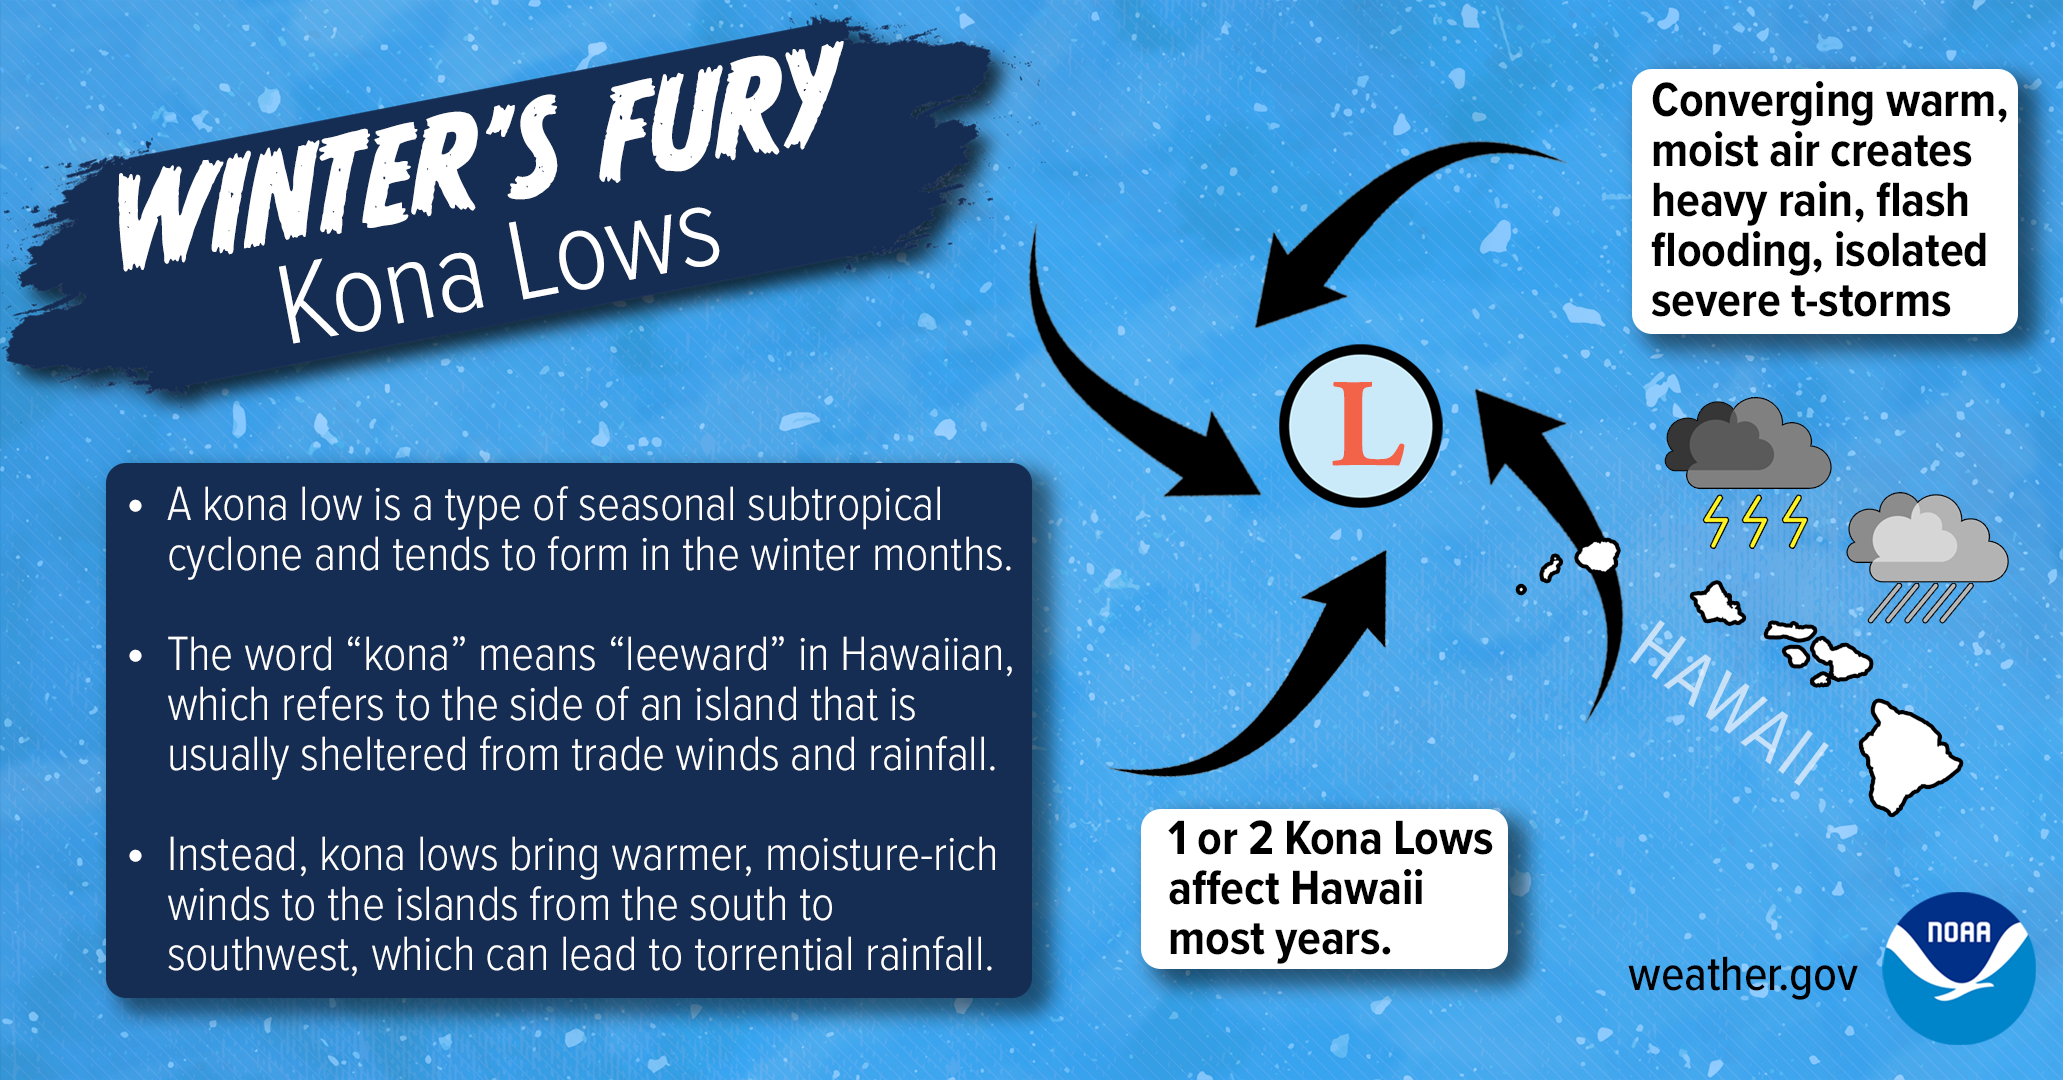 https://www.weather.gov/images/wrn/Infographics/2022/Kona-Low.png